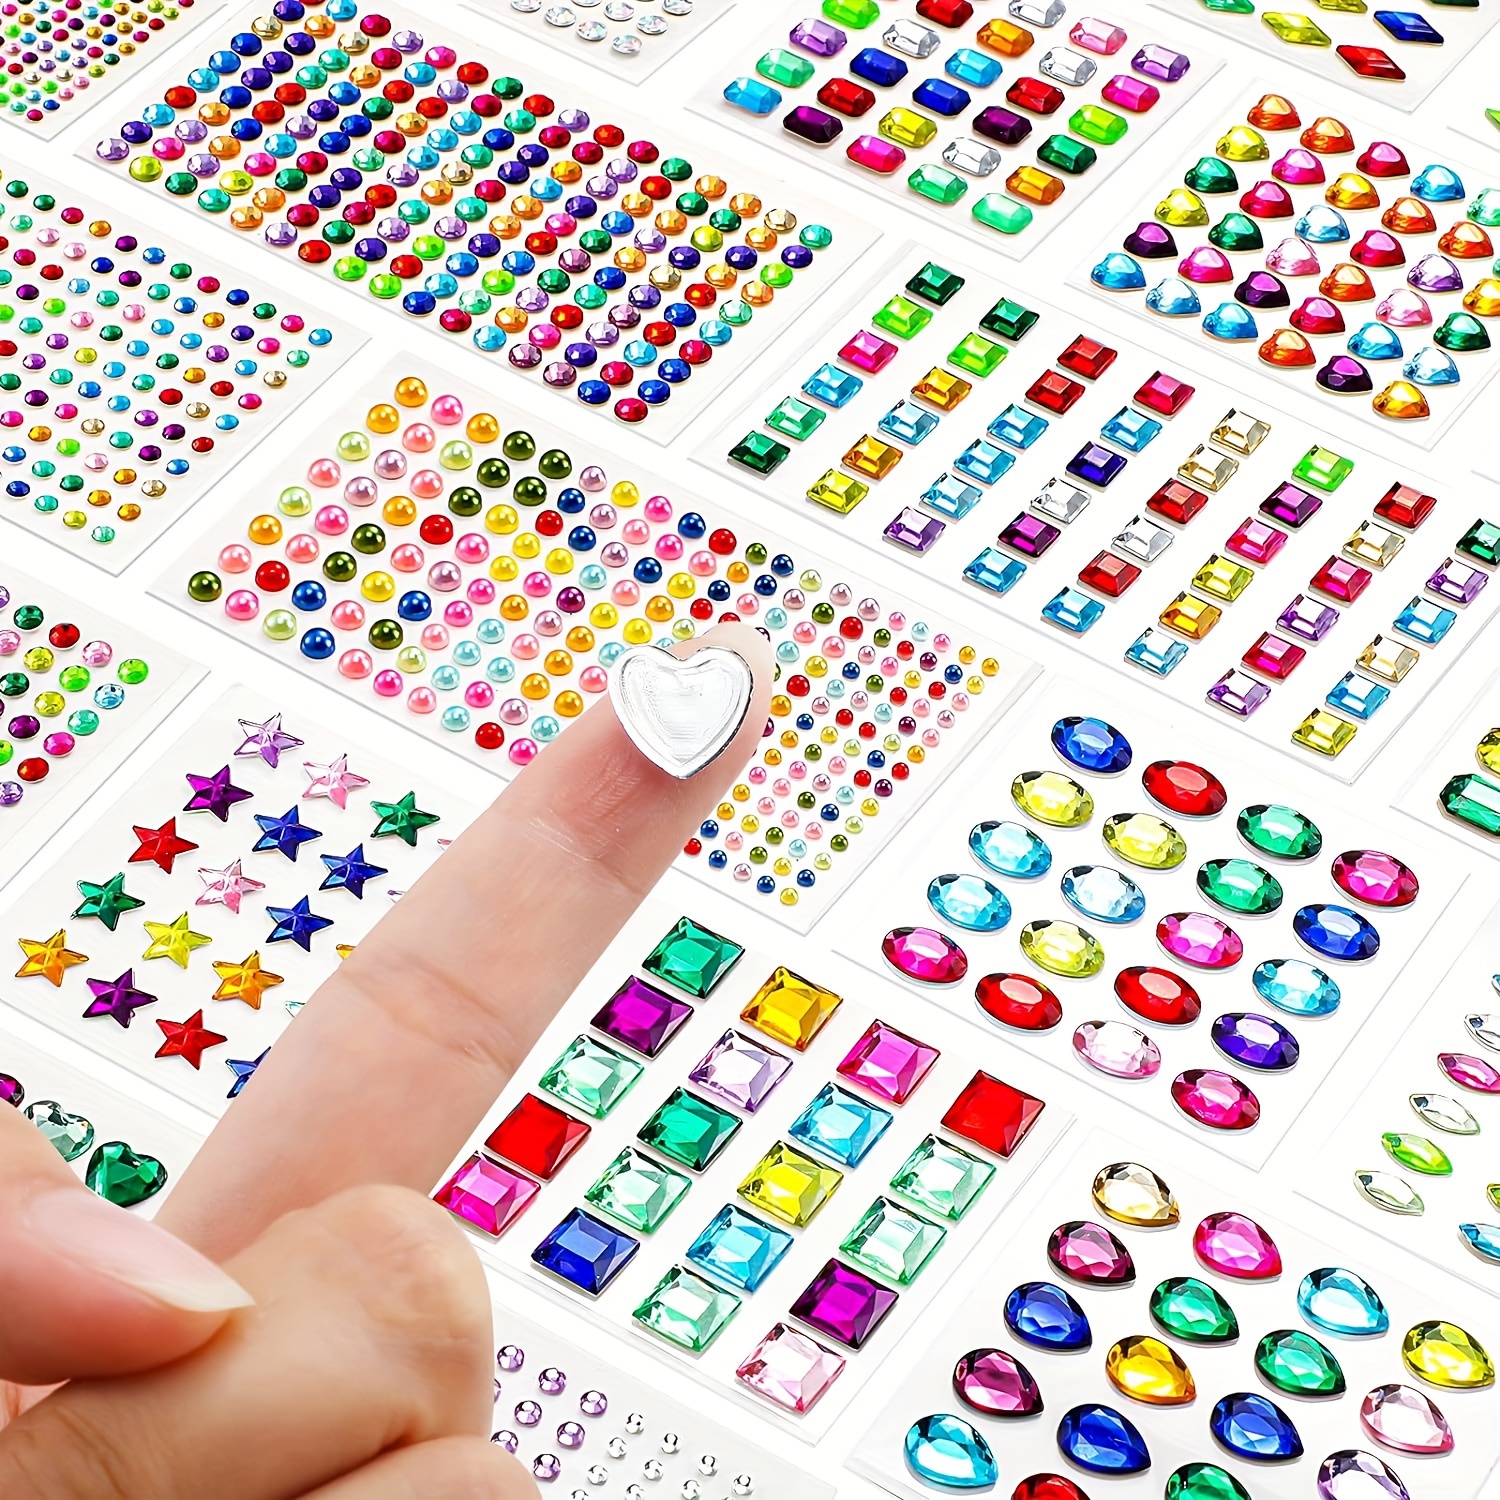 1995pcs Jewels Stickers Assorted Shapes Gem Stickers Bling Multicolor  Rhinestone Stickers Self Adhesive Face Gems Stick On Jewels For Crafts DIY  Makeu